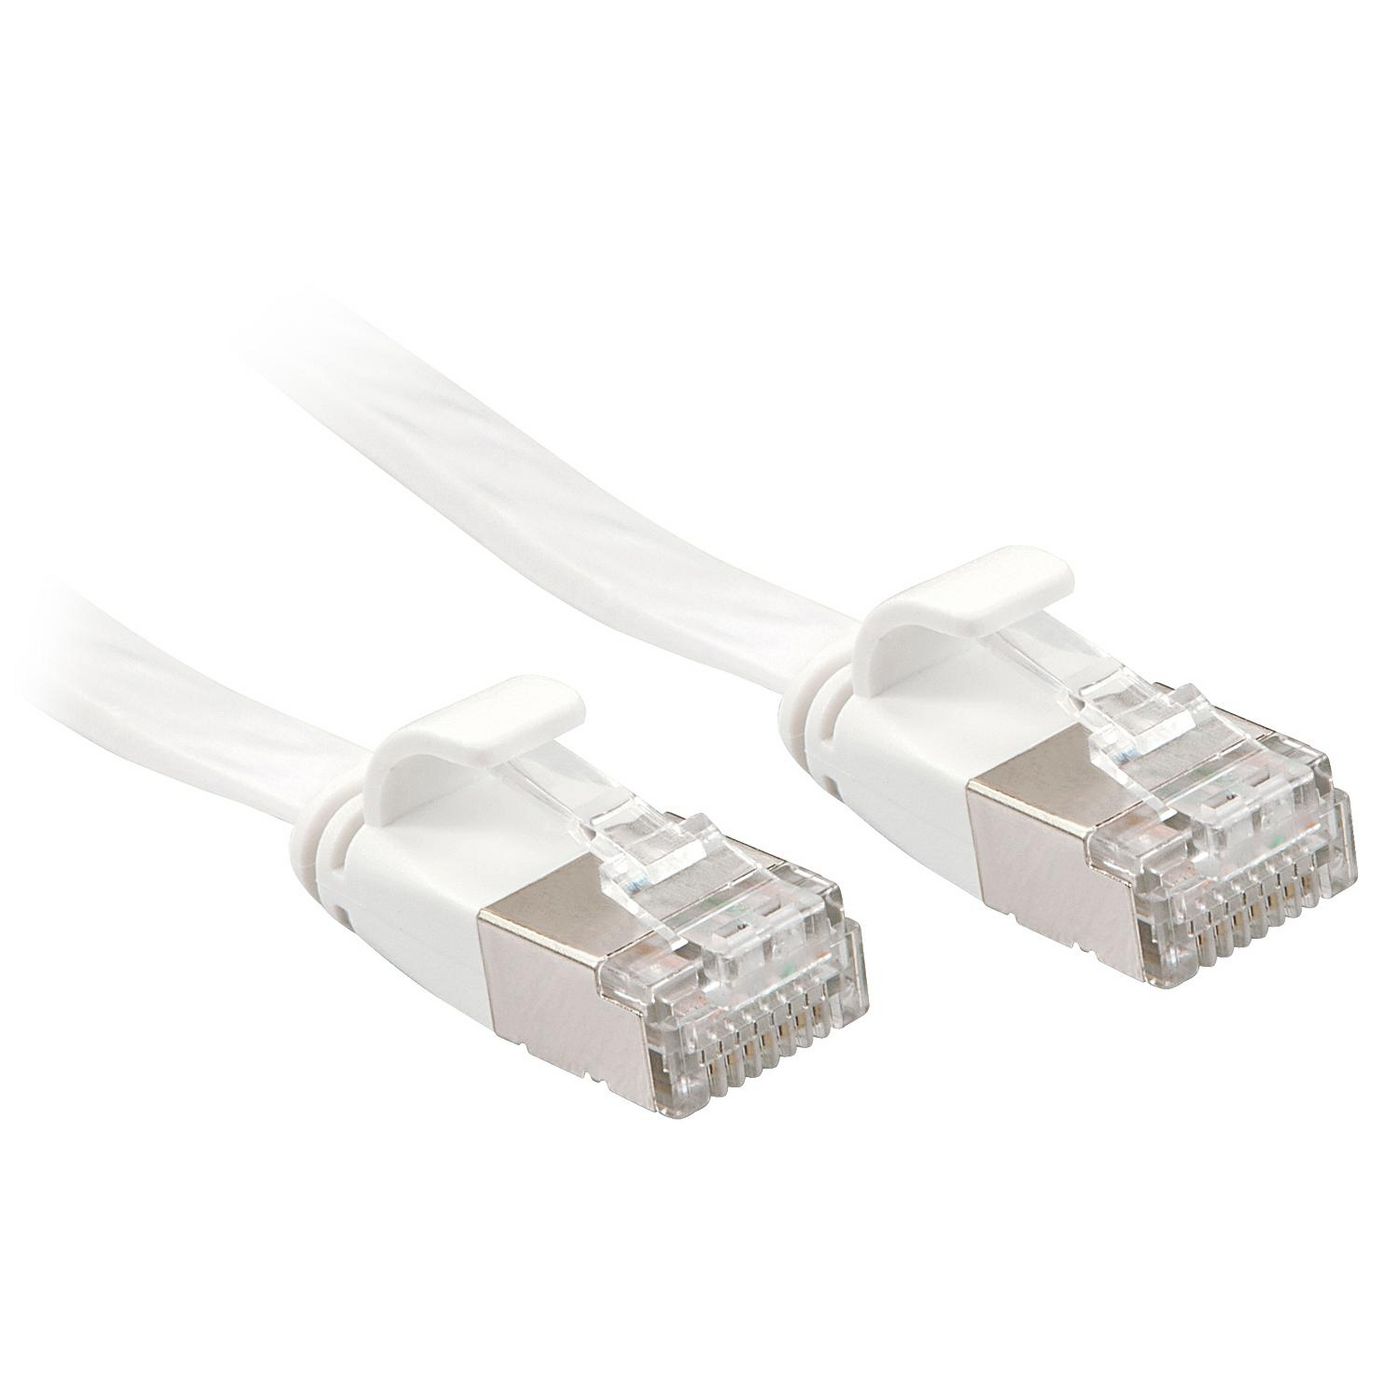 Lindy 47540 W128370979 Networking Cable White 0.3 M 